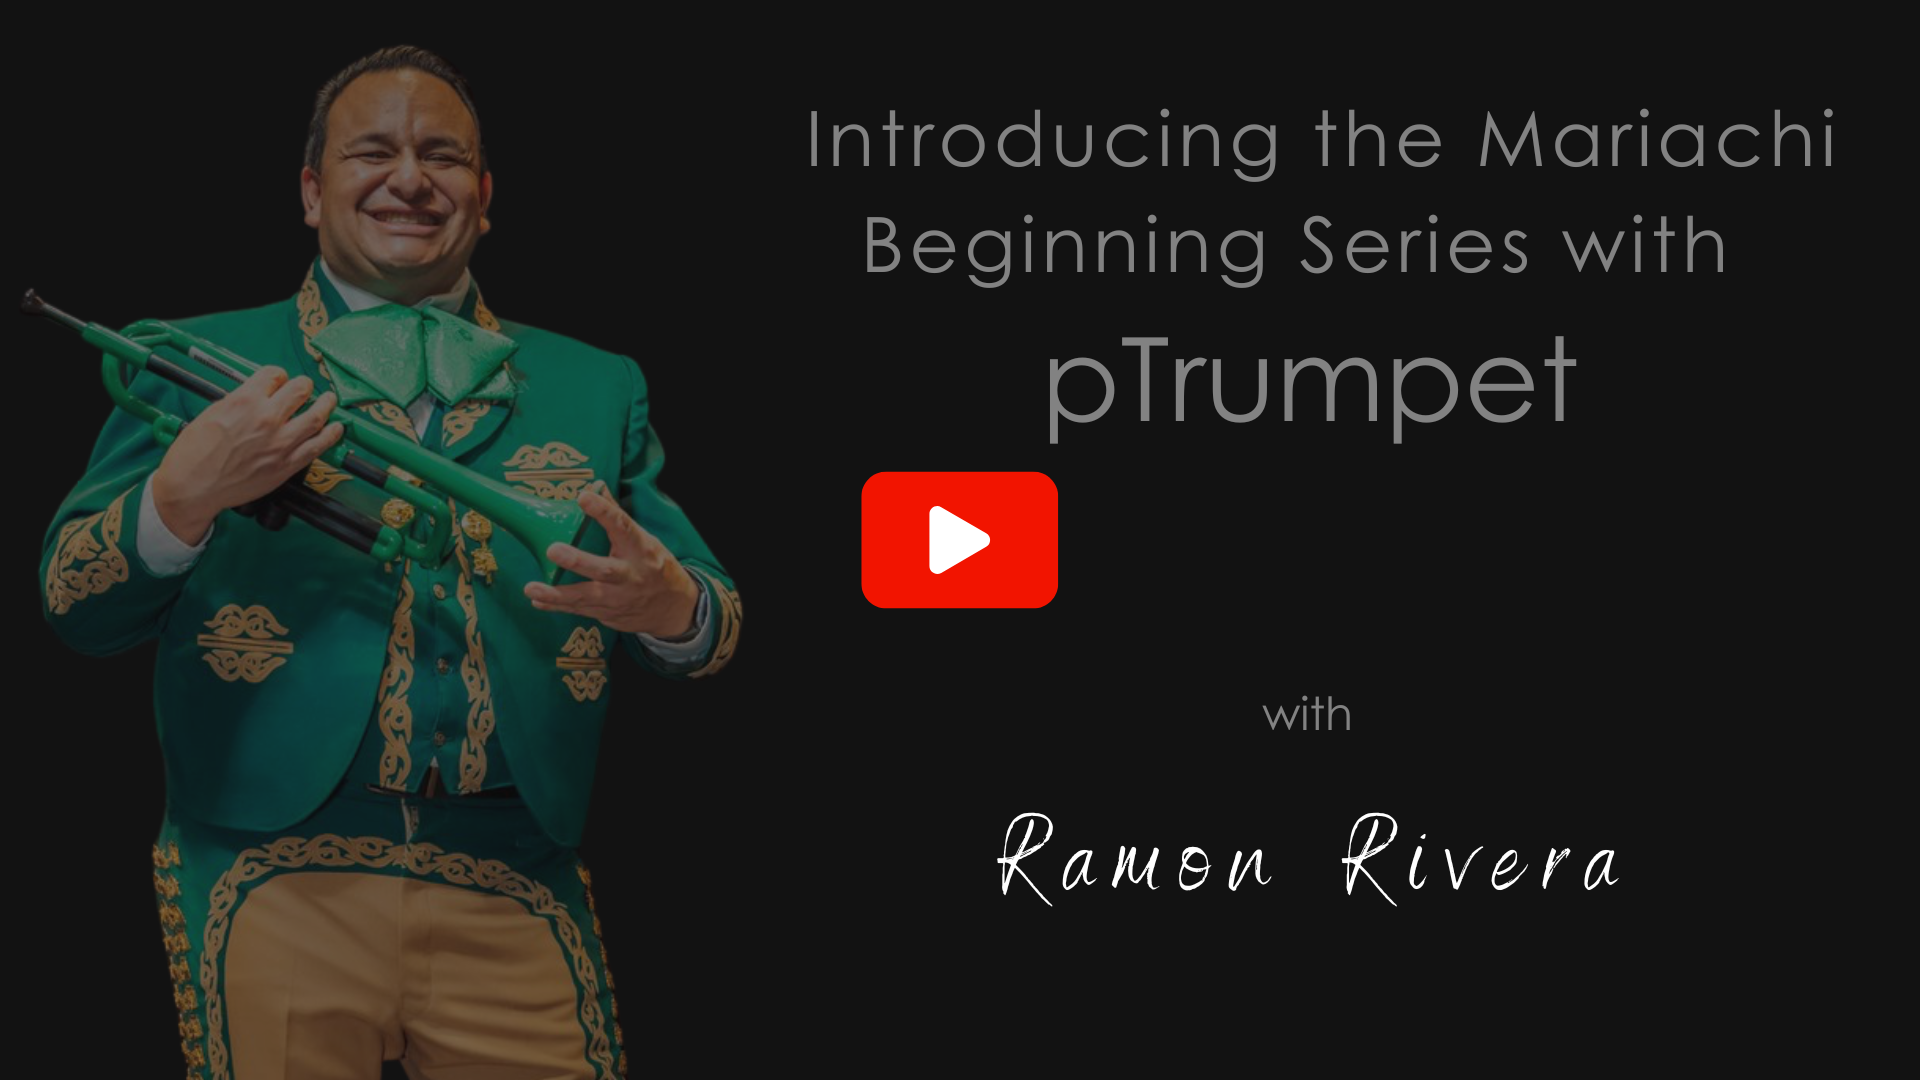 Ramon Rivera introduces the Mariachi Beginning Series with @theptrumpet